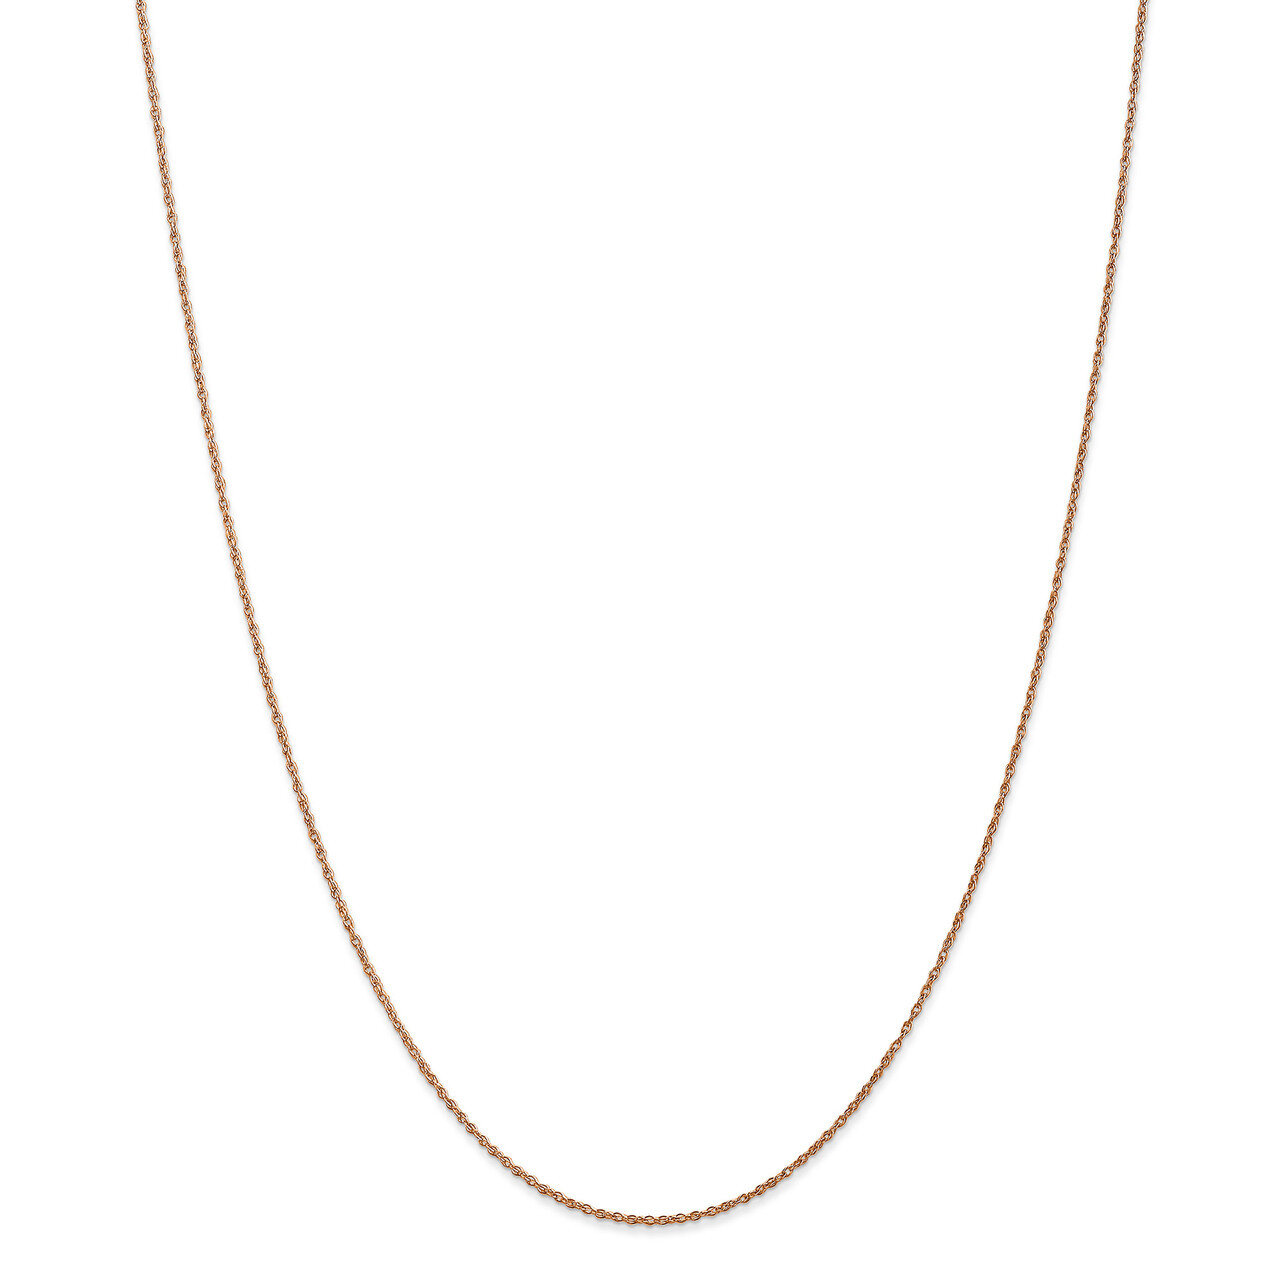 18 Inch 0.8mm Light-Baby Rope Chain 14k Rose Gold RSC35-18